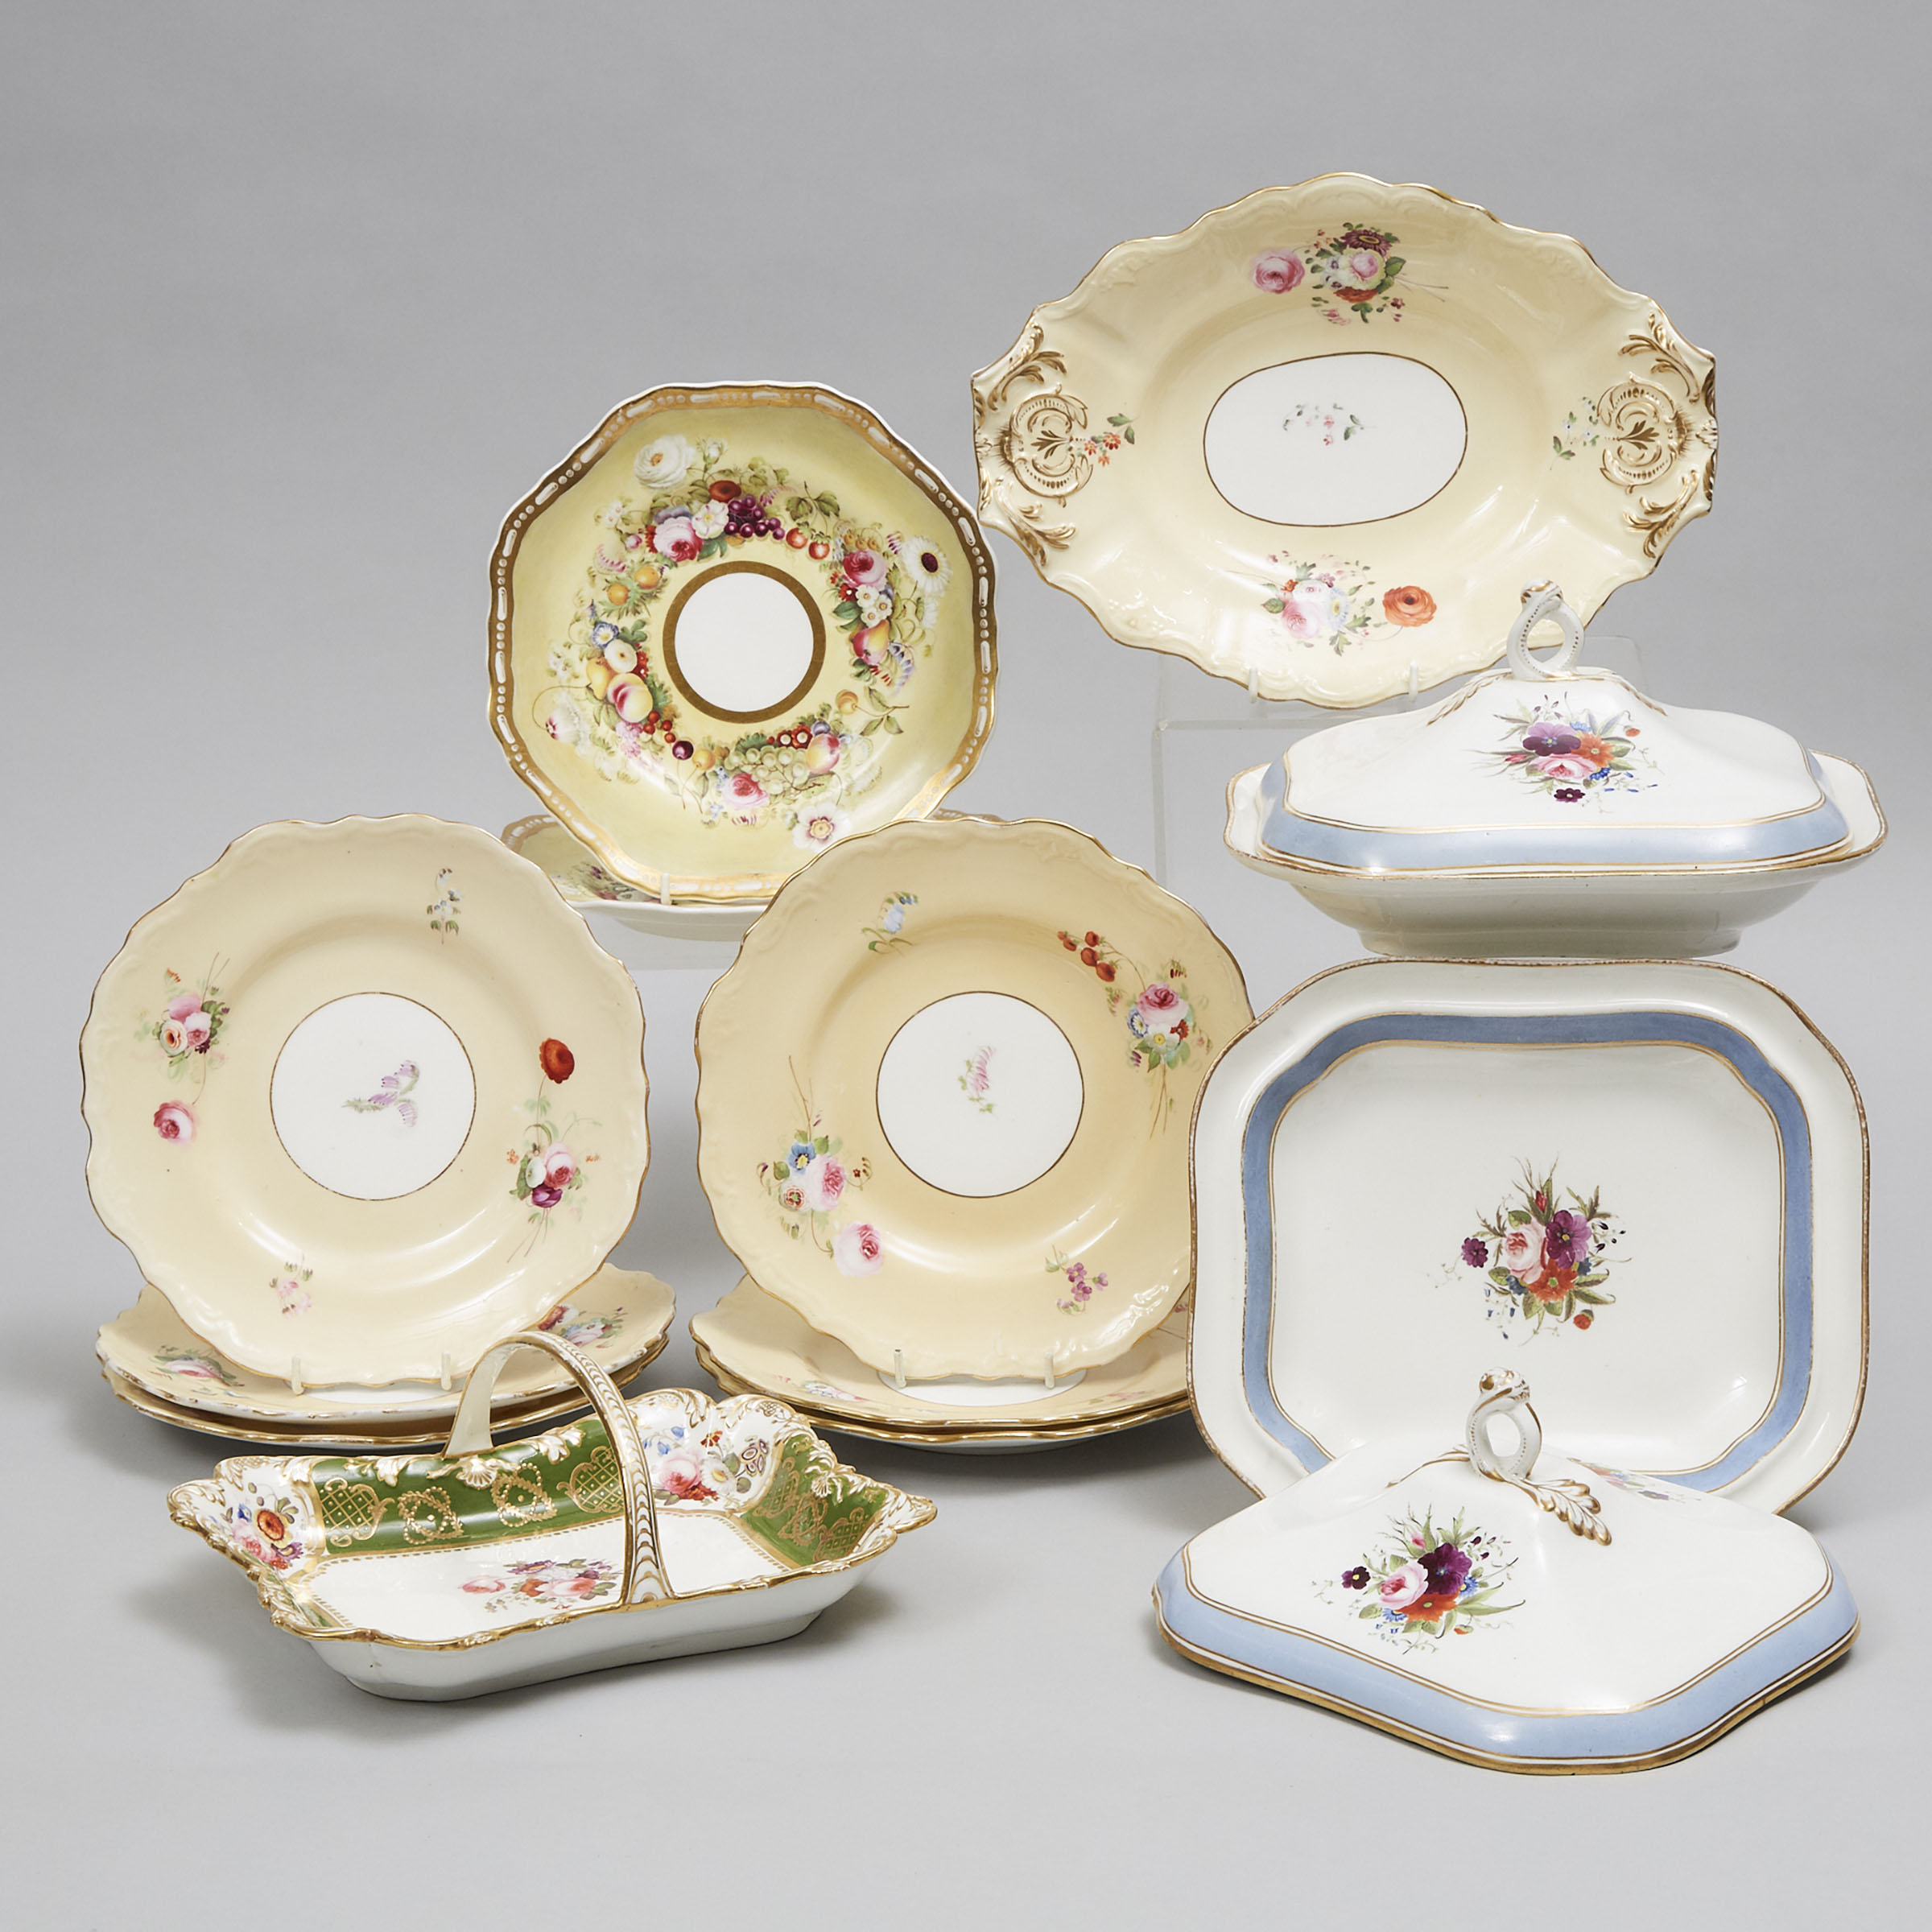 Group of English Porcelain, 19th century